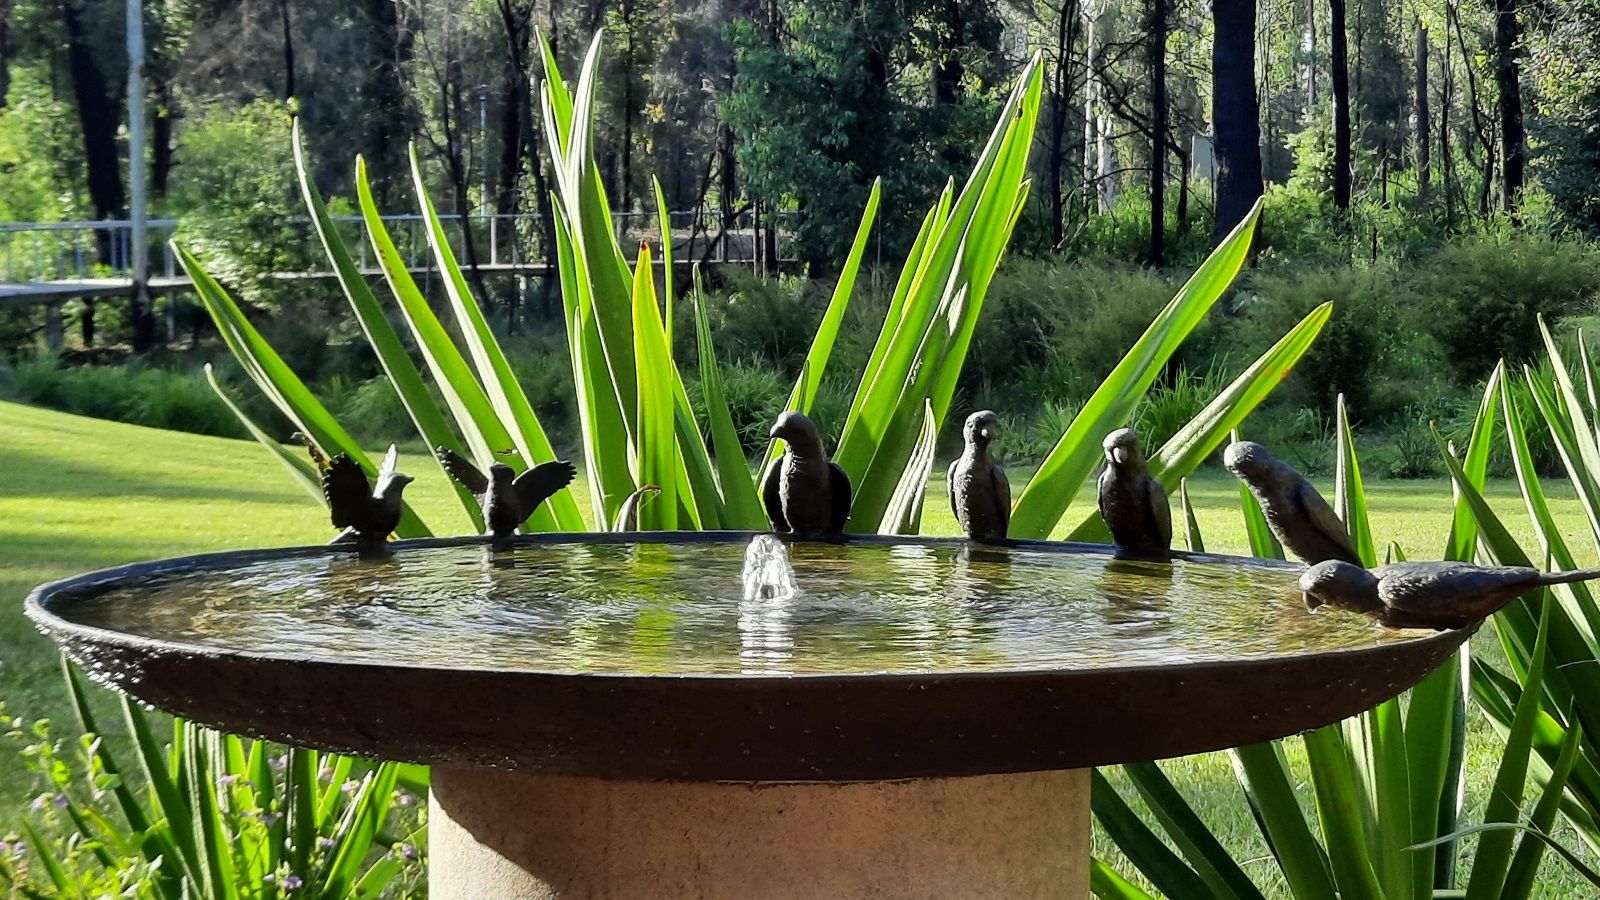 A circular water feature with ceramic bird statues positioned on one side of the basin. banner image